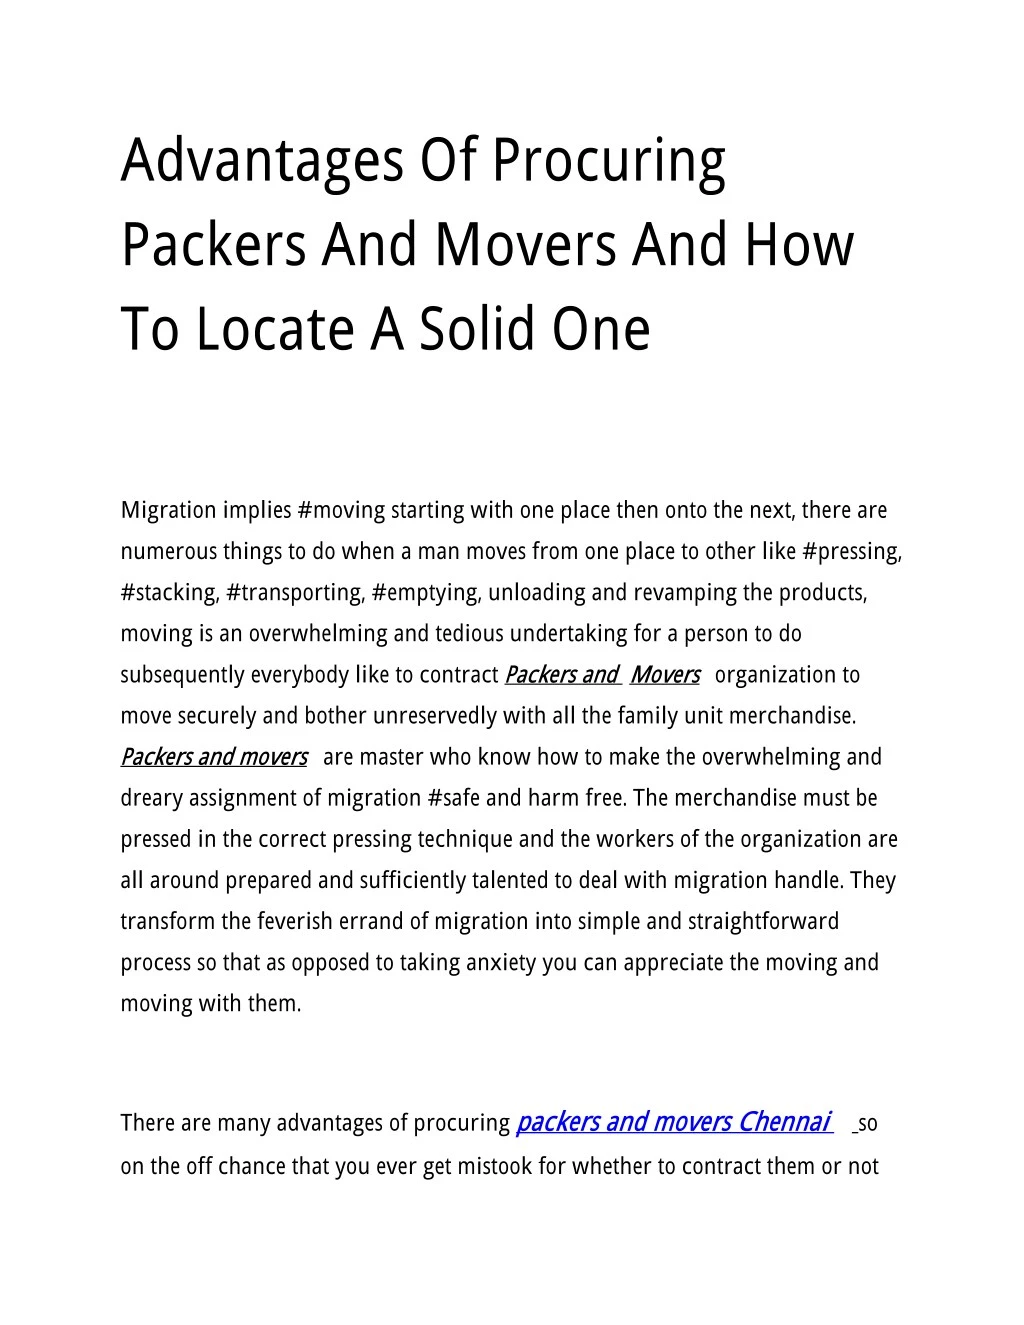 advantages of procuring packers and movers